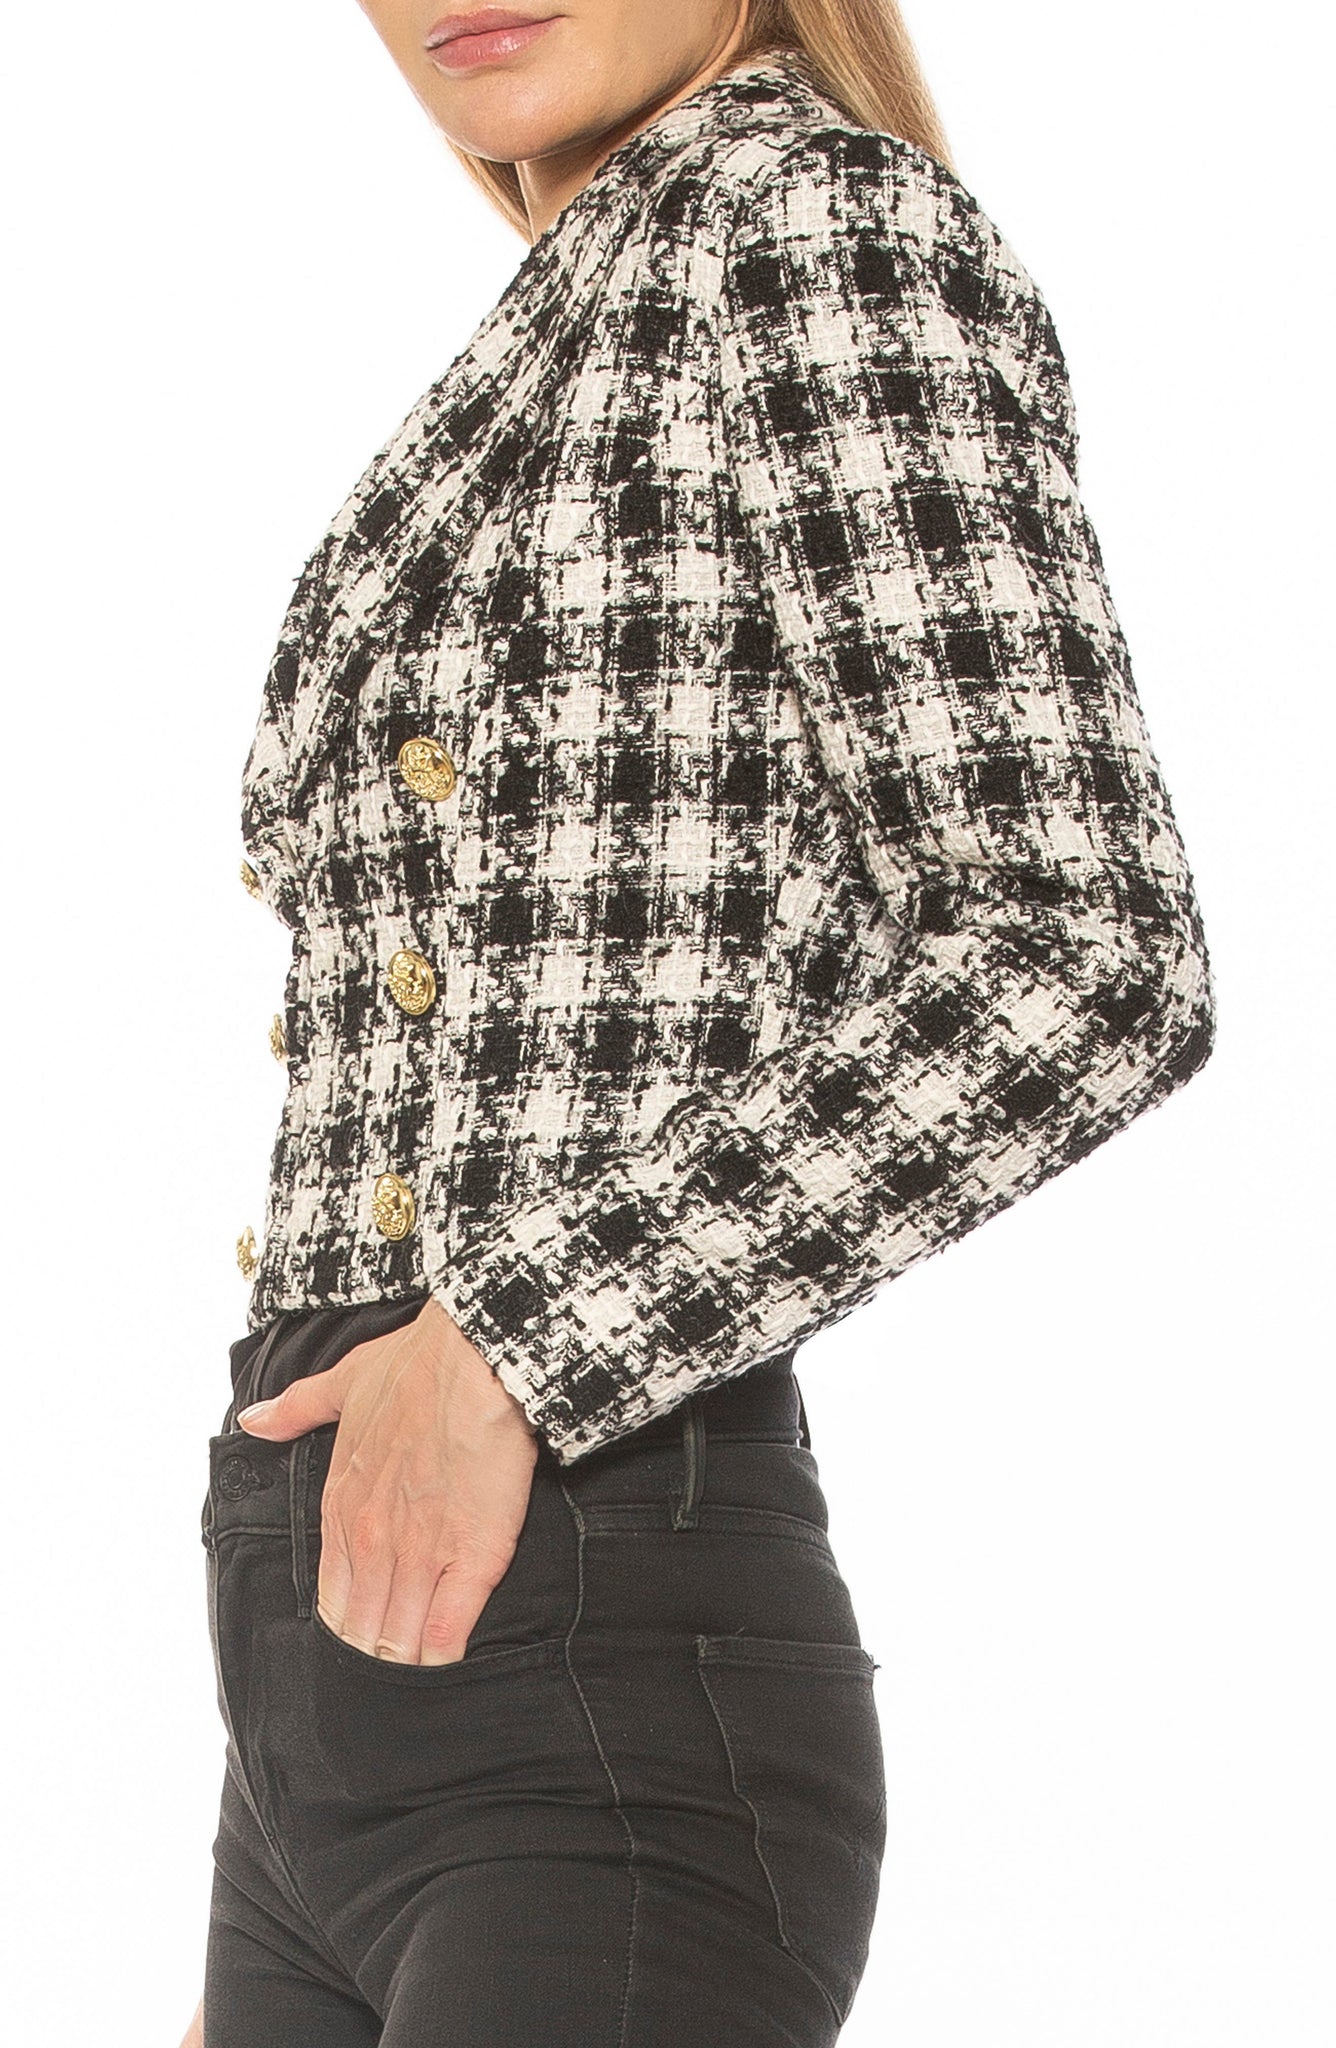 ALEXIA ADMOR Jesse Double Breasted Crop Tweed Blazer, Main, color, BW HOUNDSTOOTH